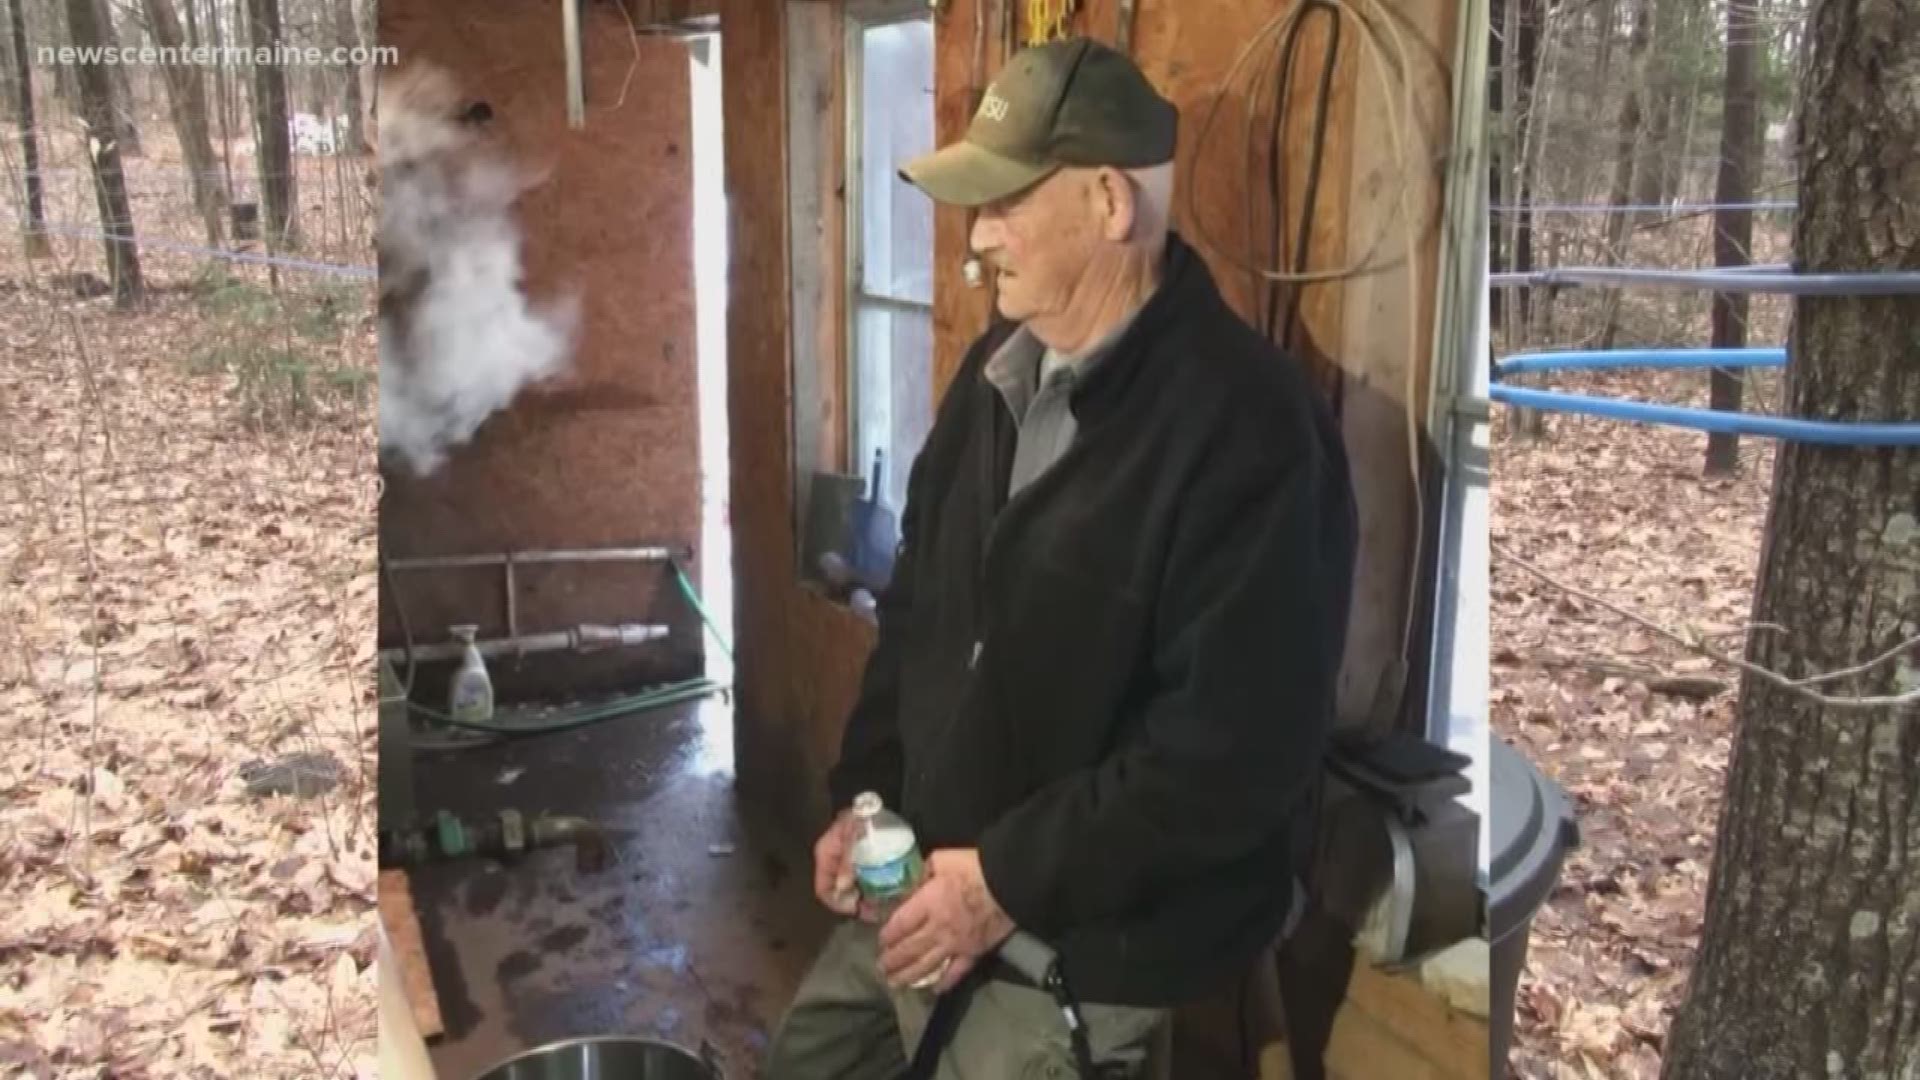 Founder of Lucerne Maple Products Timothy Littlefield Sr. passed away in July 2018. Now, his family is preparing for his favorite day of the year: Maine Maple Sunday.